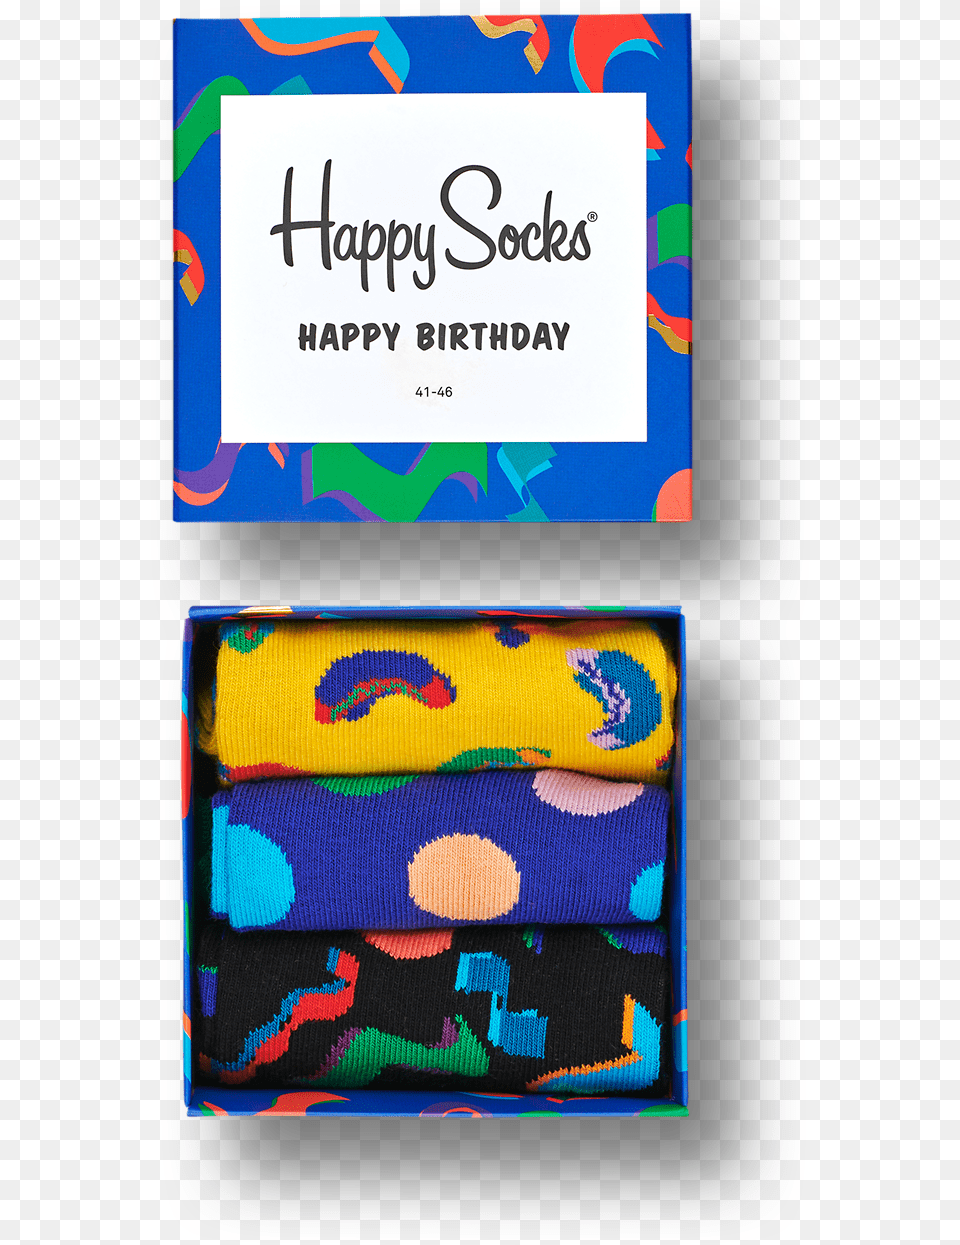 Funky Colourful Socks For Men Women Amp Kids Happy Socks, Accessories, Pattern, Home Decor Png Image